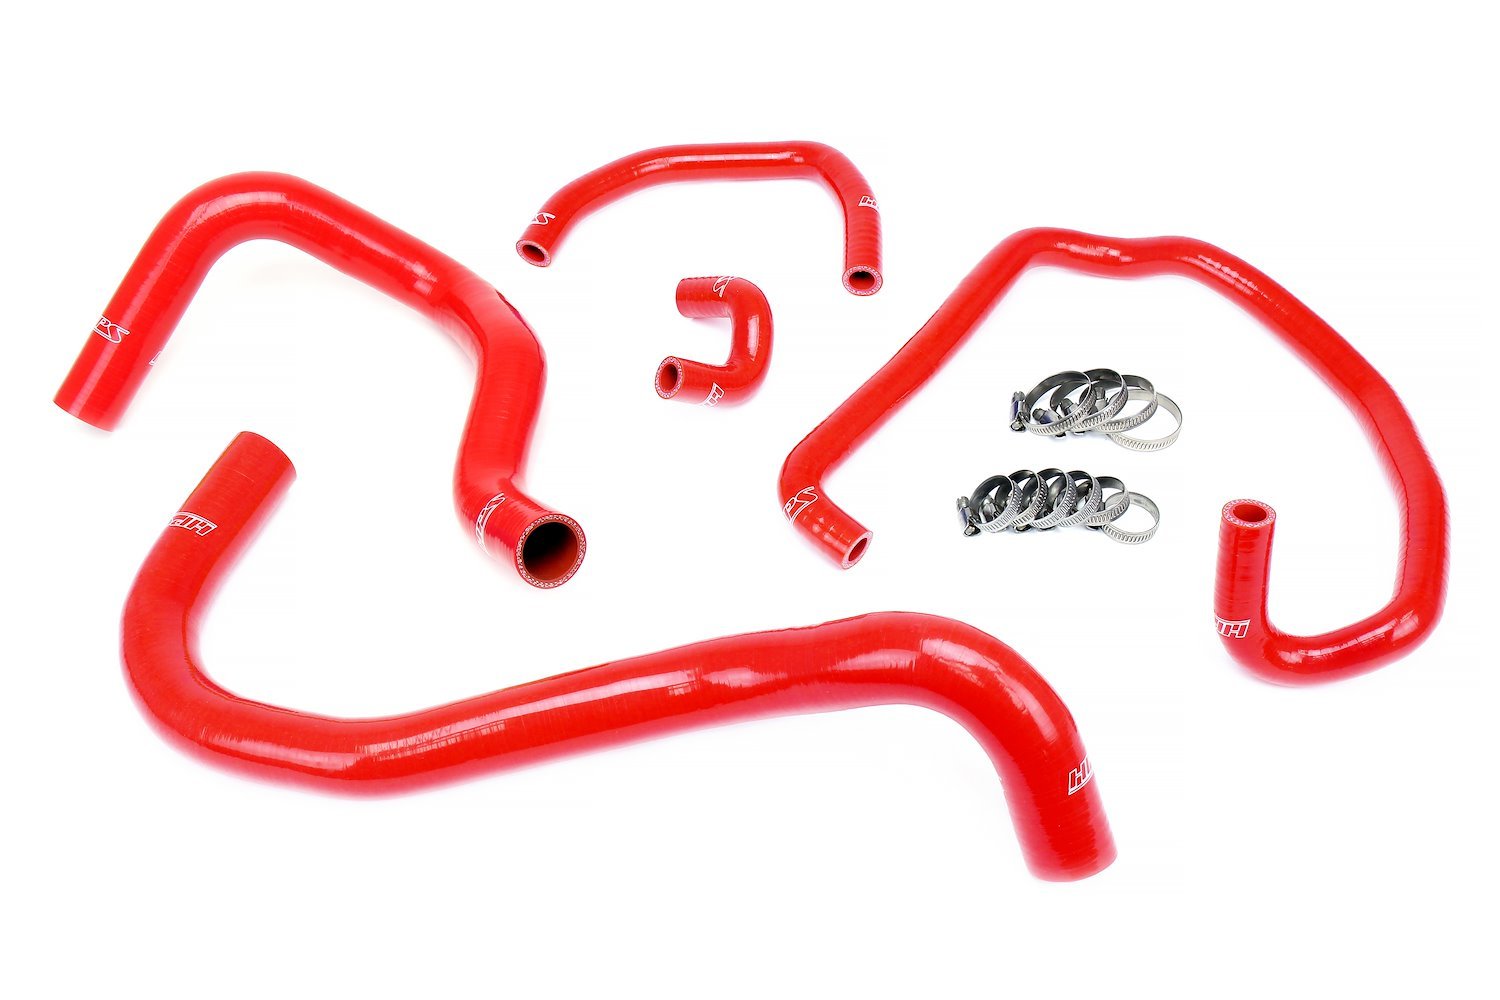 57-1921-RED Coolant Hose Kit, High-Temp 3-Ply Reinforced Silicone, Replaces OEM Radiator & Heater Hoses